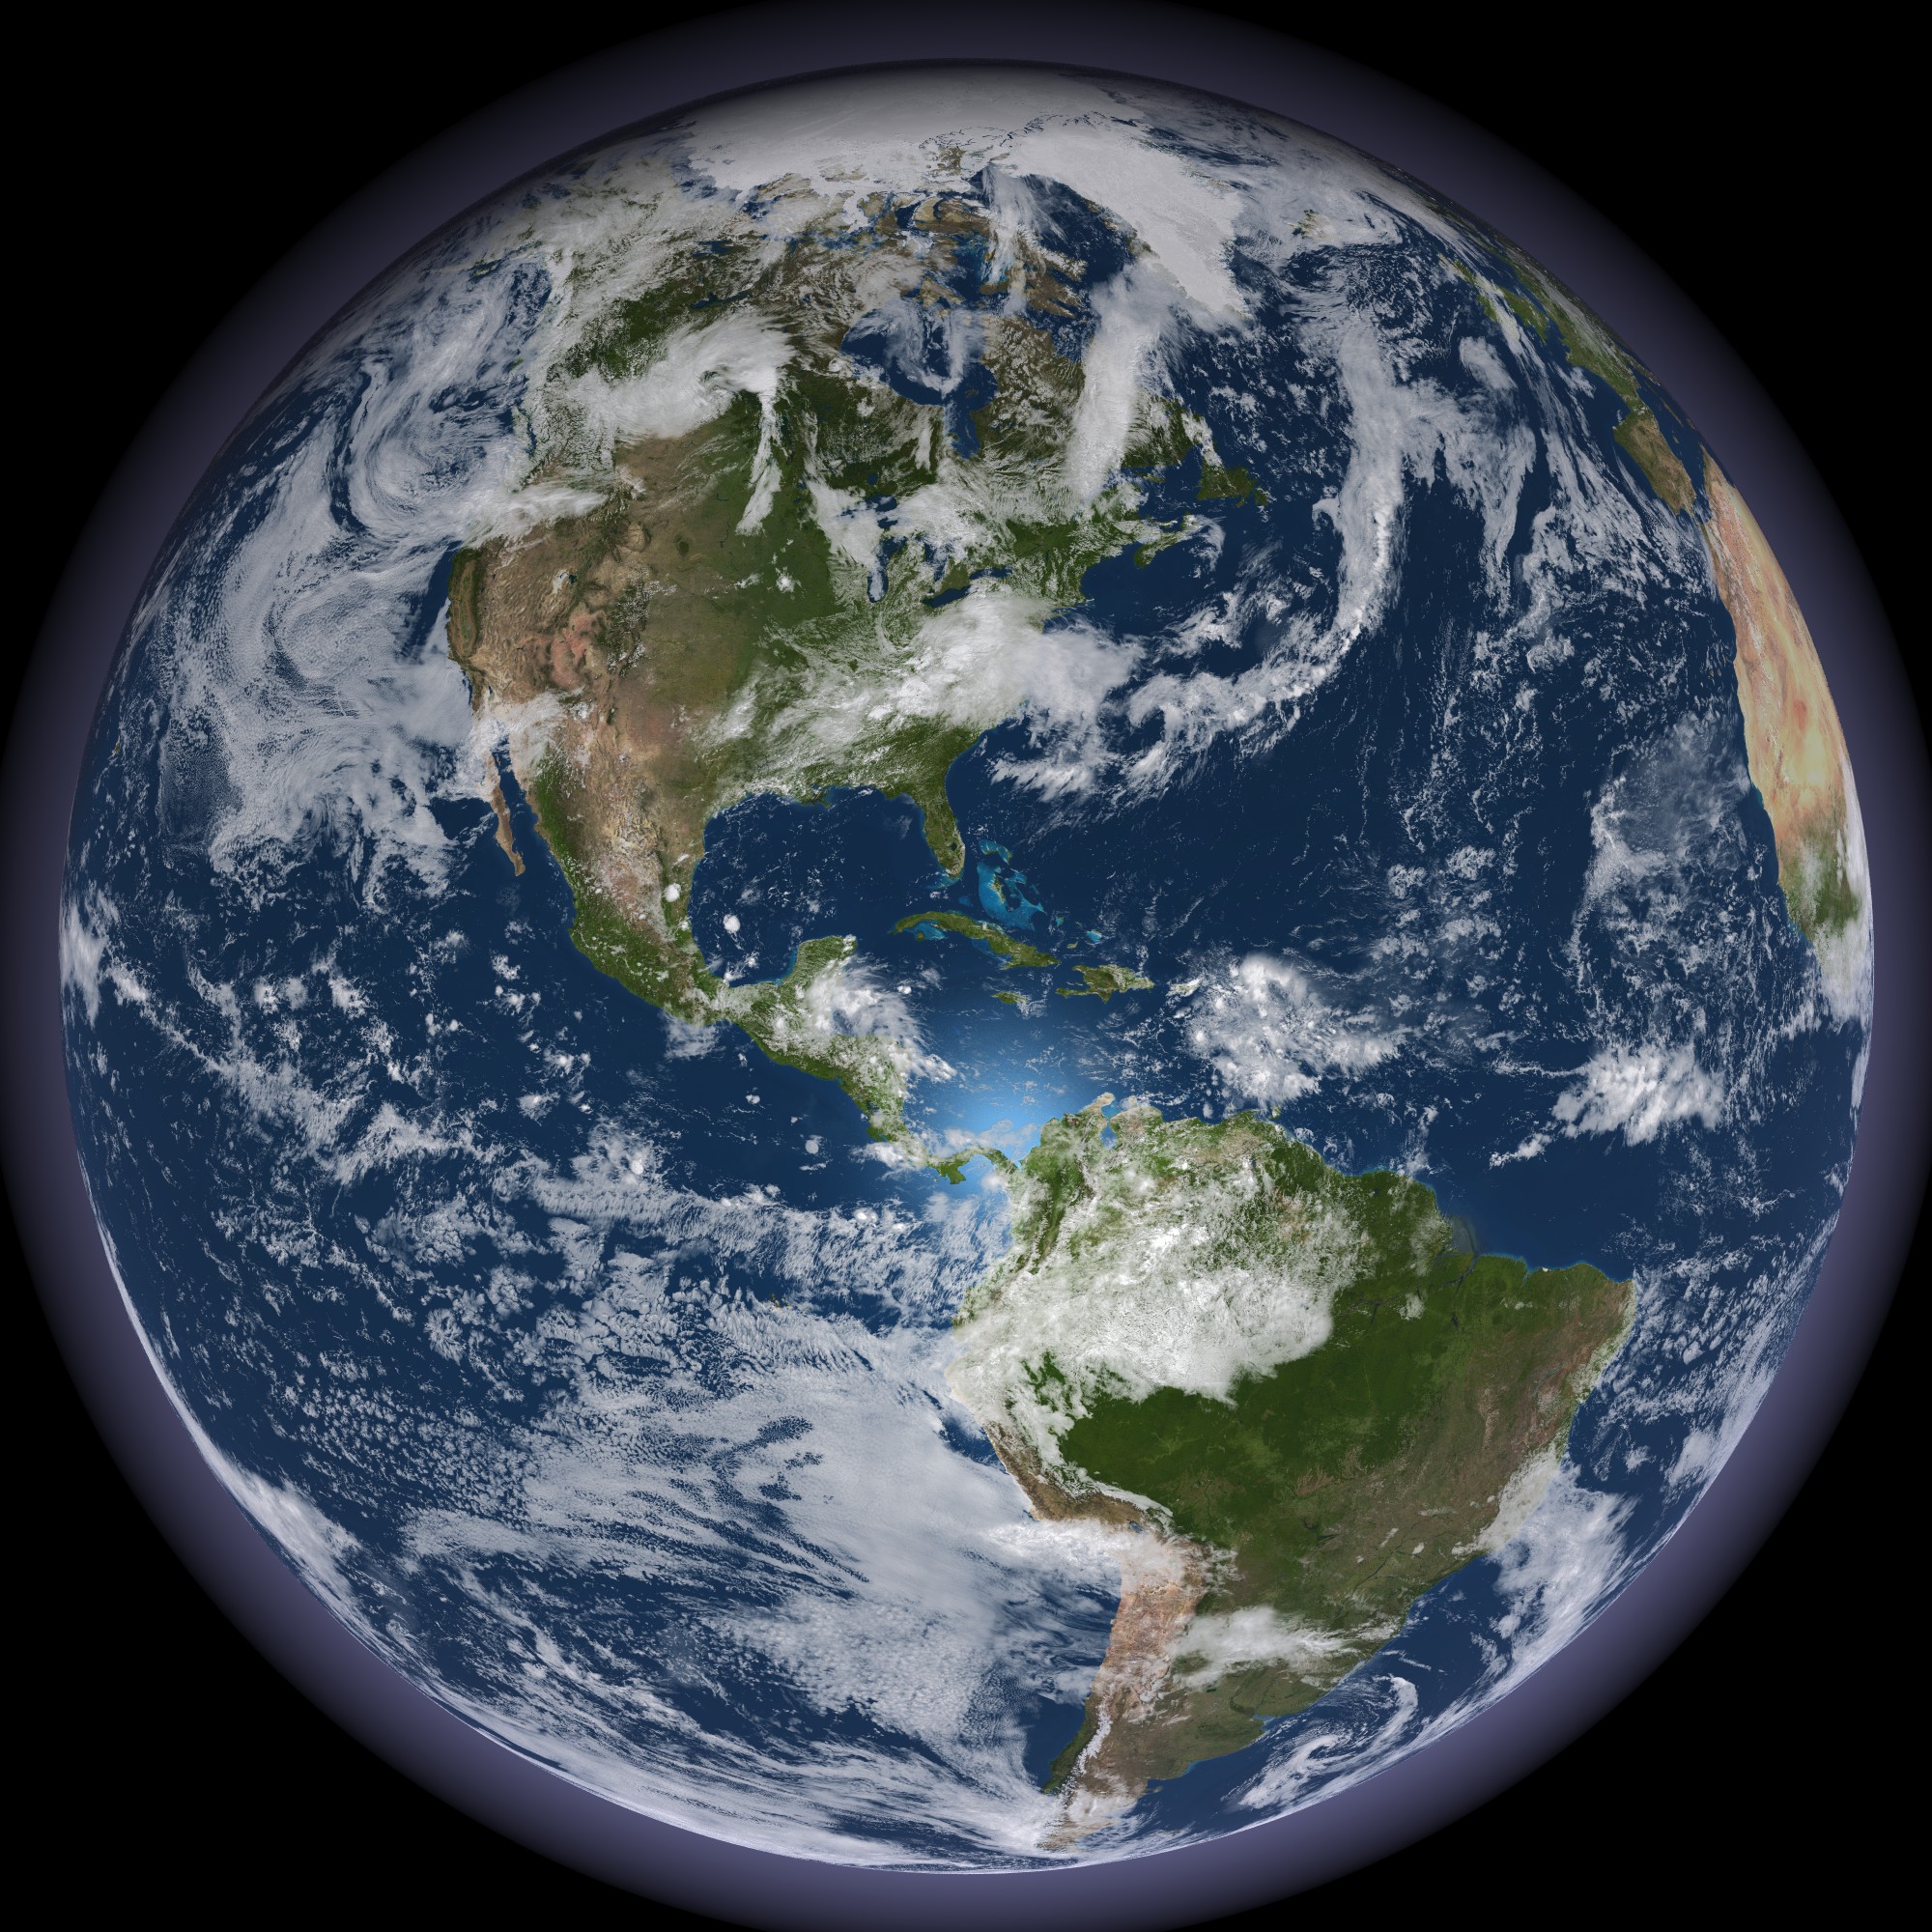 Photo of the Earth focusing on North and South America